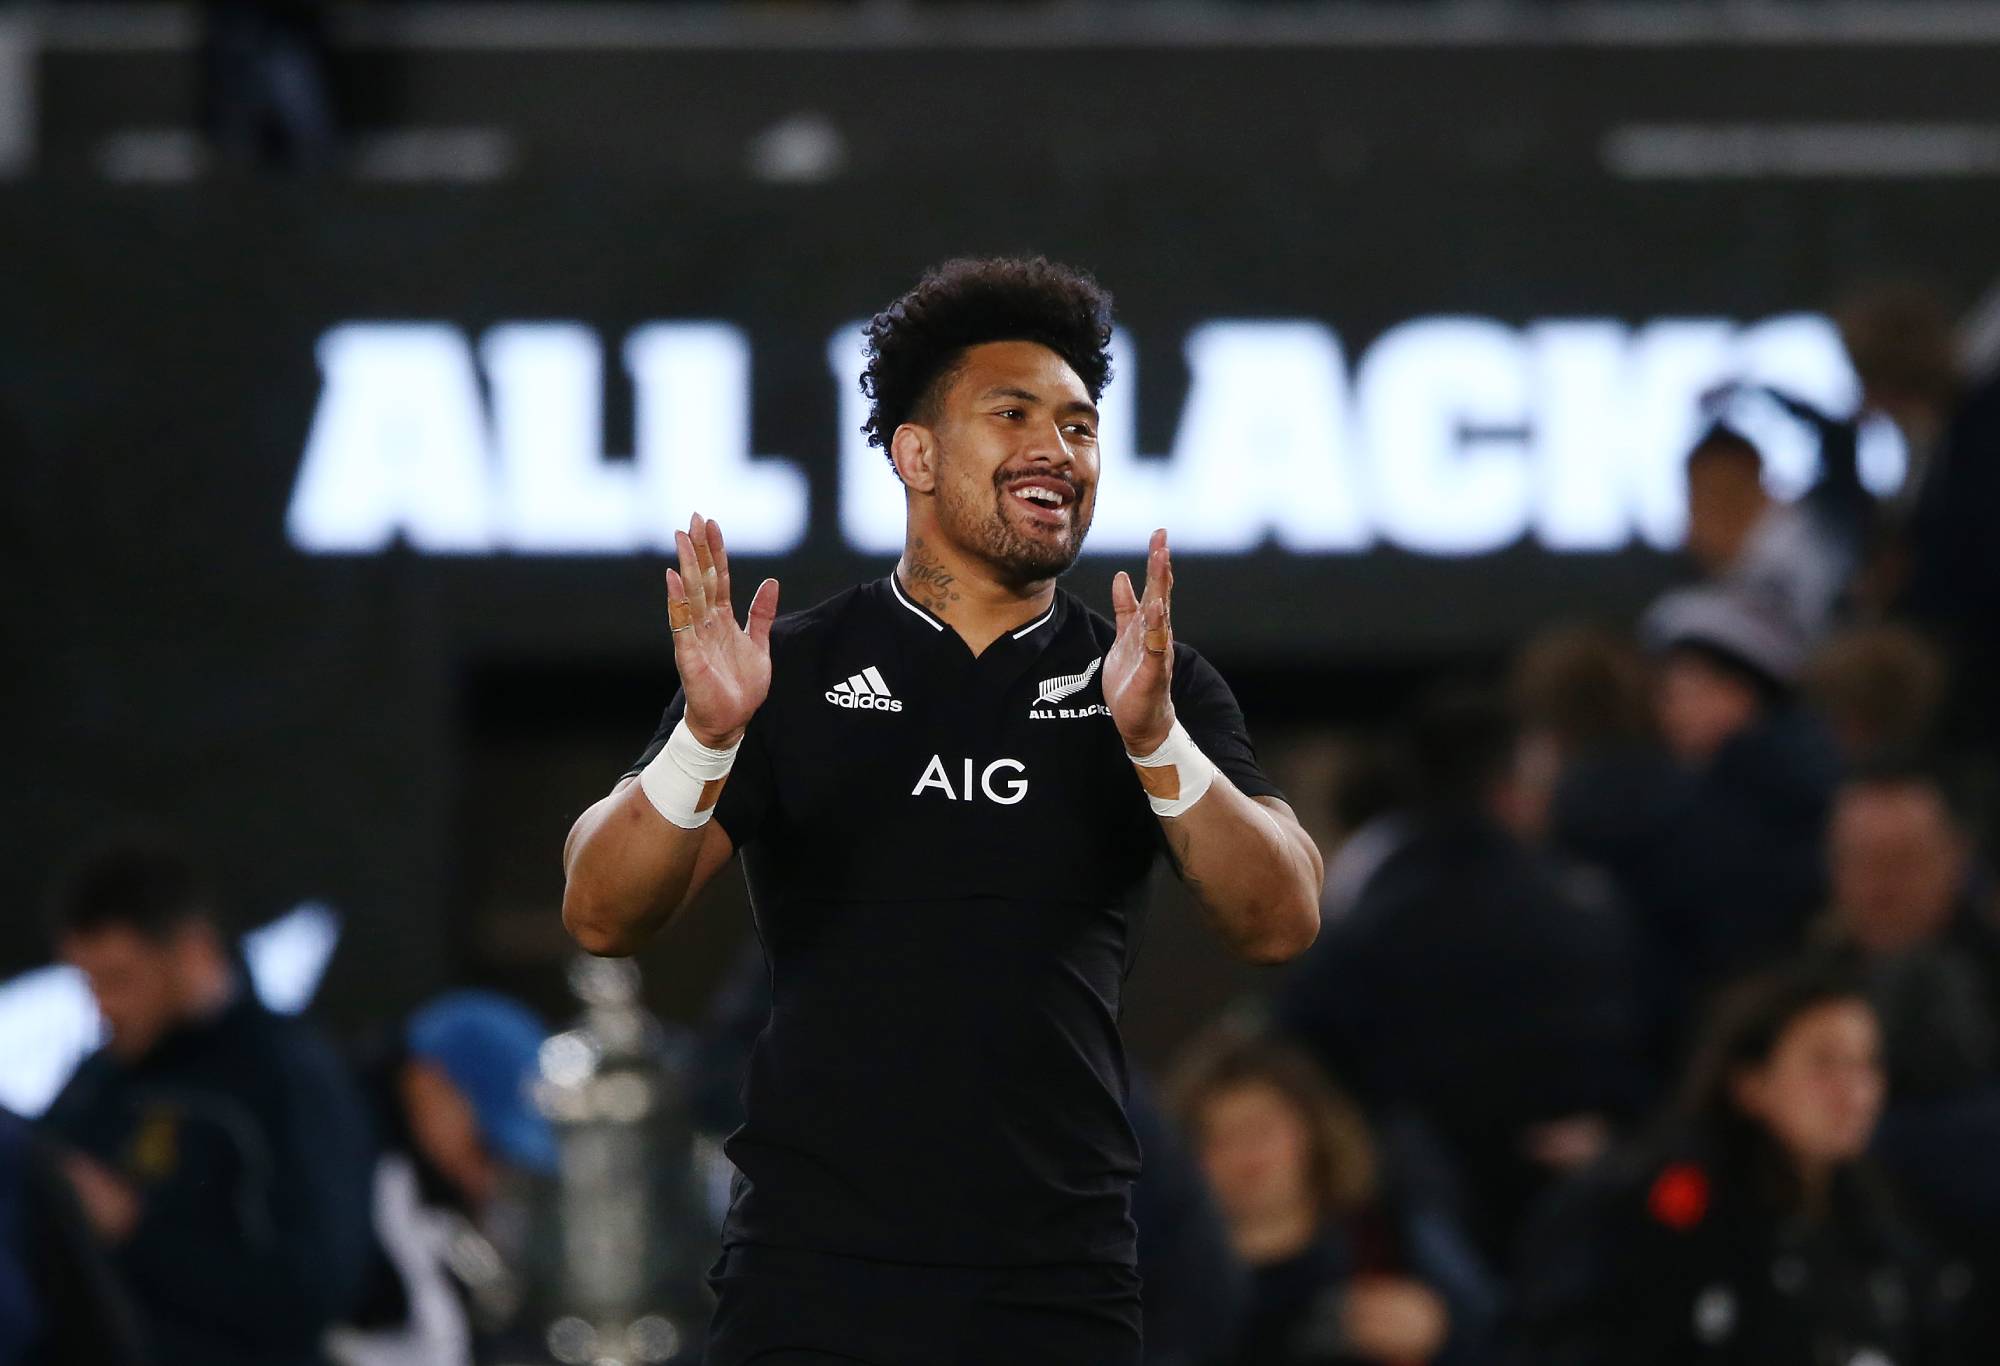 Rugby News: All Black latest to make Japan switch, Borthwick calls on fans who booed Eddie to return for ‘next chapter’